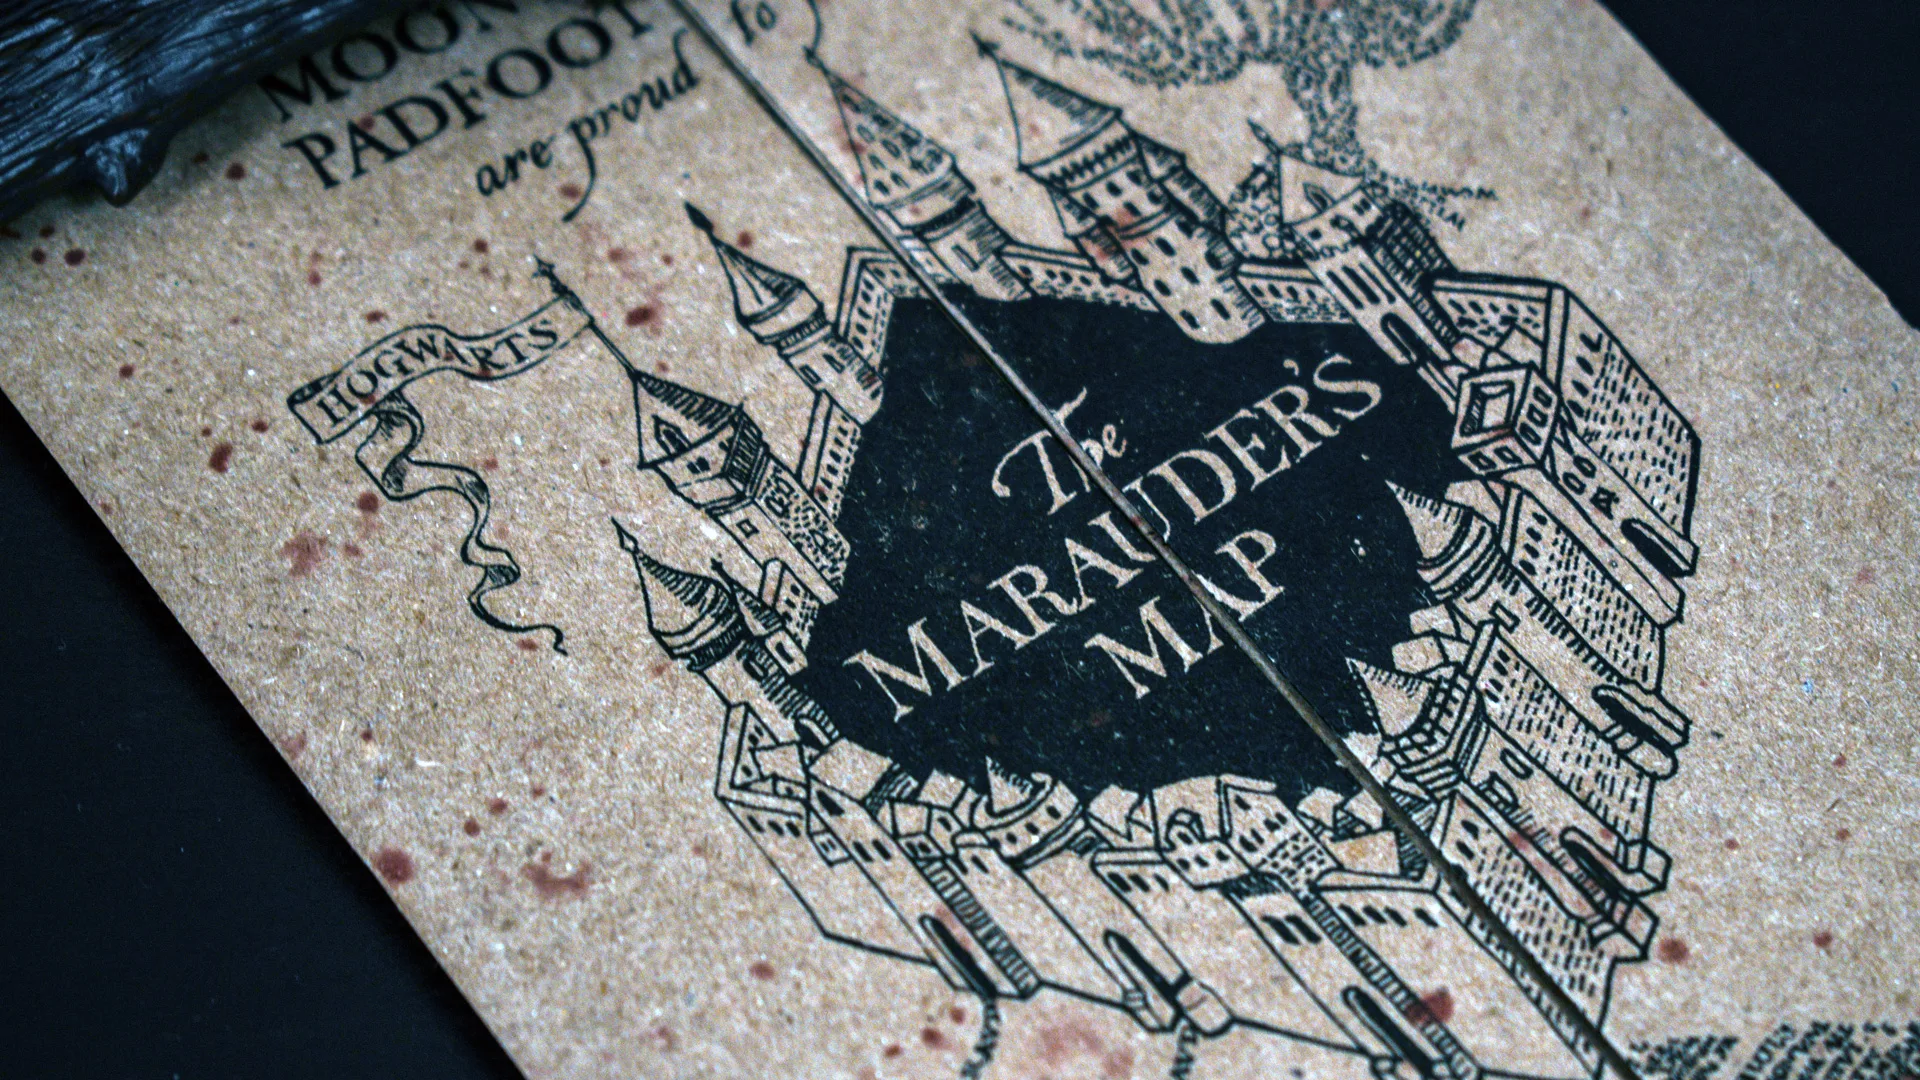 A photo of the Maurader's Map from Harry Potter up close showing the text THE MAURADERS MAP surrounded by black and castle illustration